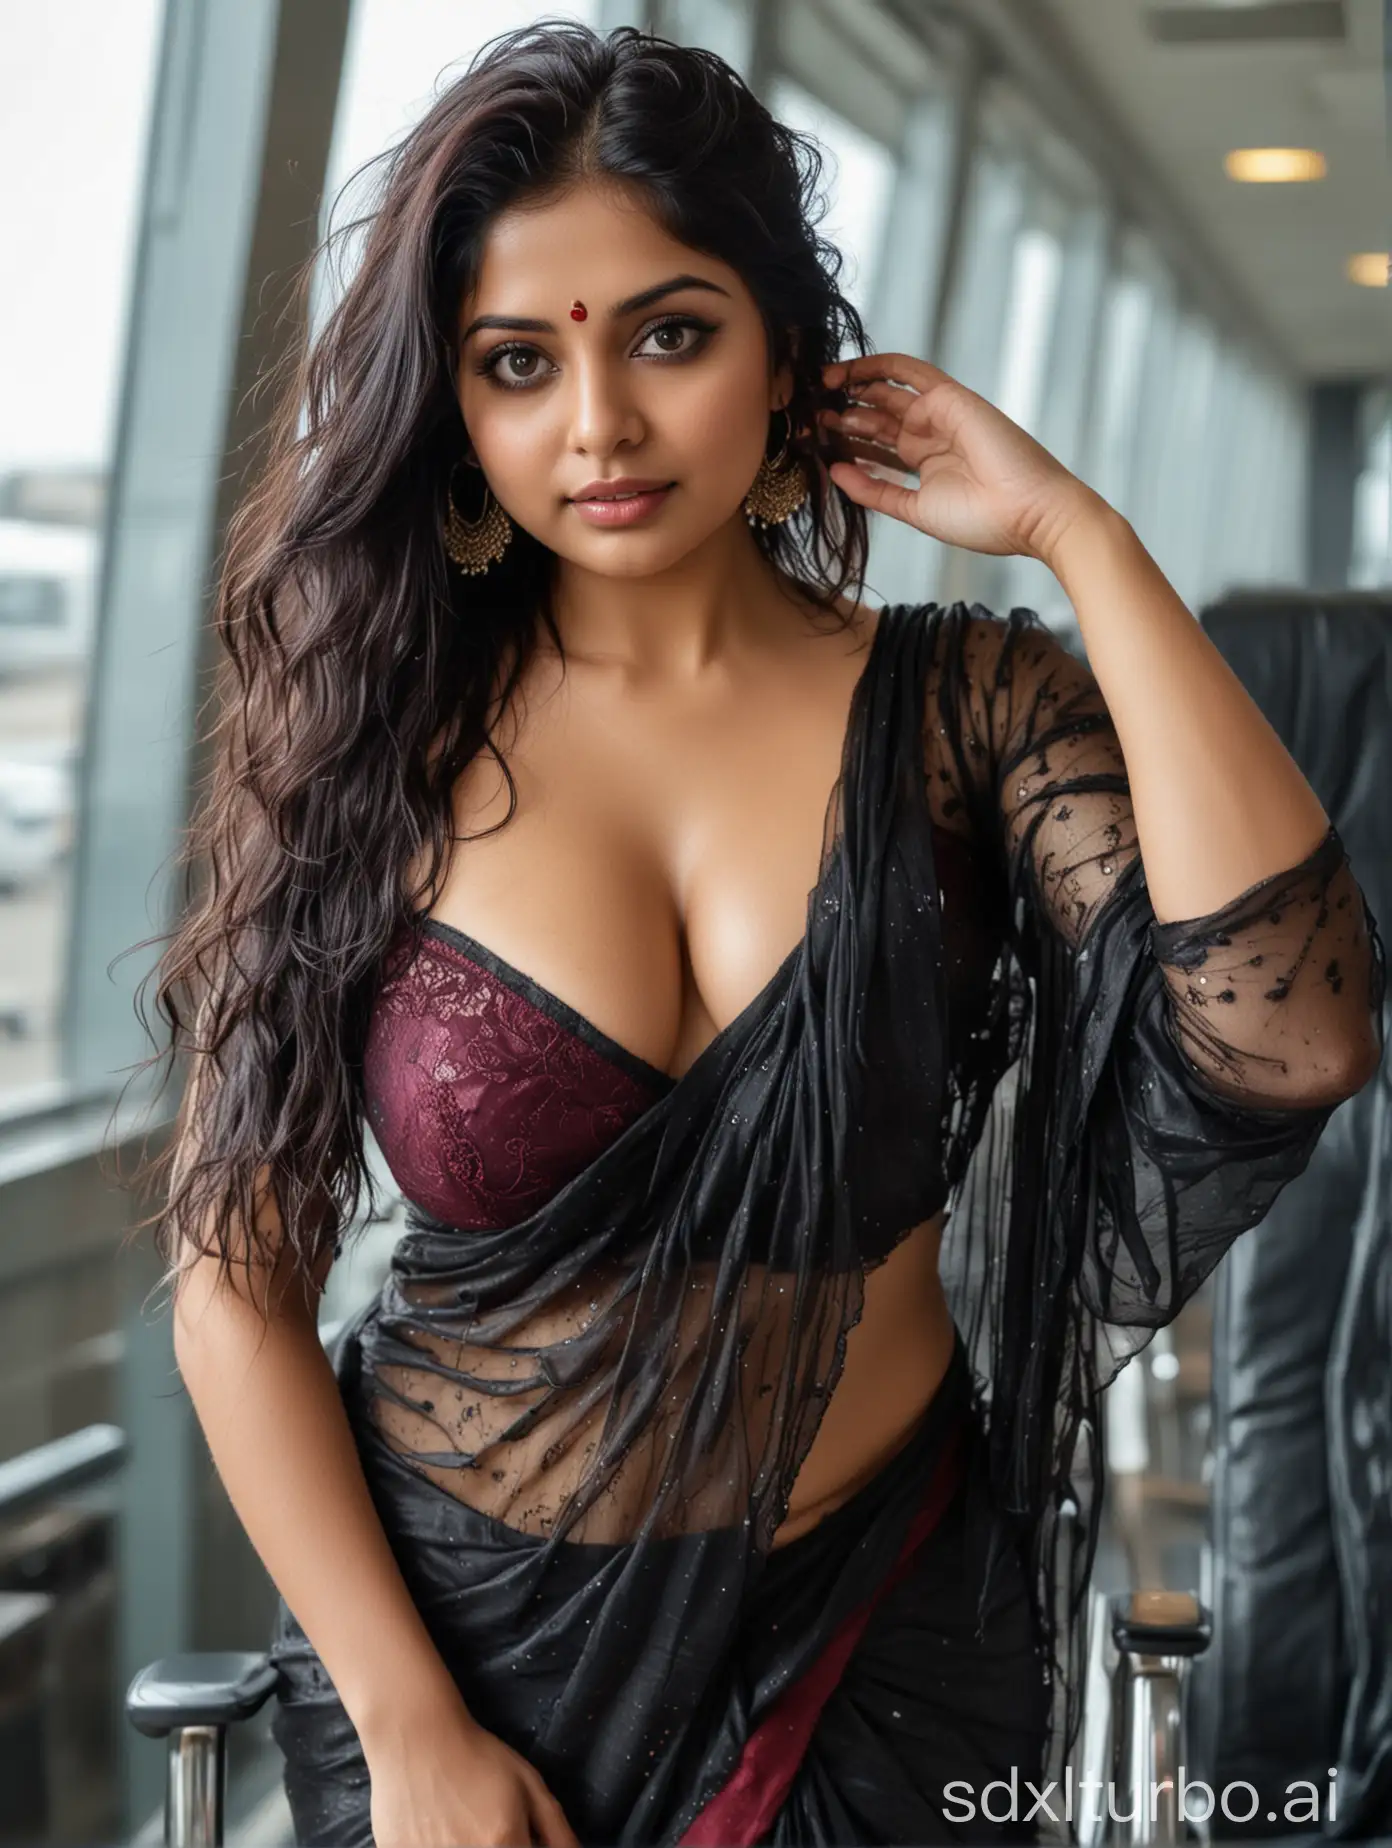 wet and messed up hair, flowing hair, wearing a transparent black sari with deep décolleté, curvy Indian woman, she has large breasts, a voluptuous body, big eyes, perfect wine-red eyes, a fantastic face, beautiful appearance, with a plump female body, she has a voluptuous body, She is showing the deepest décolleté. Her hair is styled in loose waves. blurred background, full view of the body until the calf. She is standing on a chair at an airport. side view.